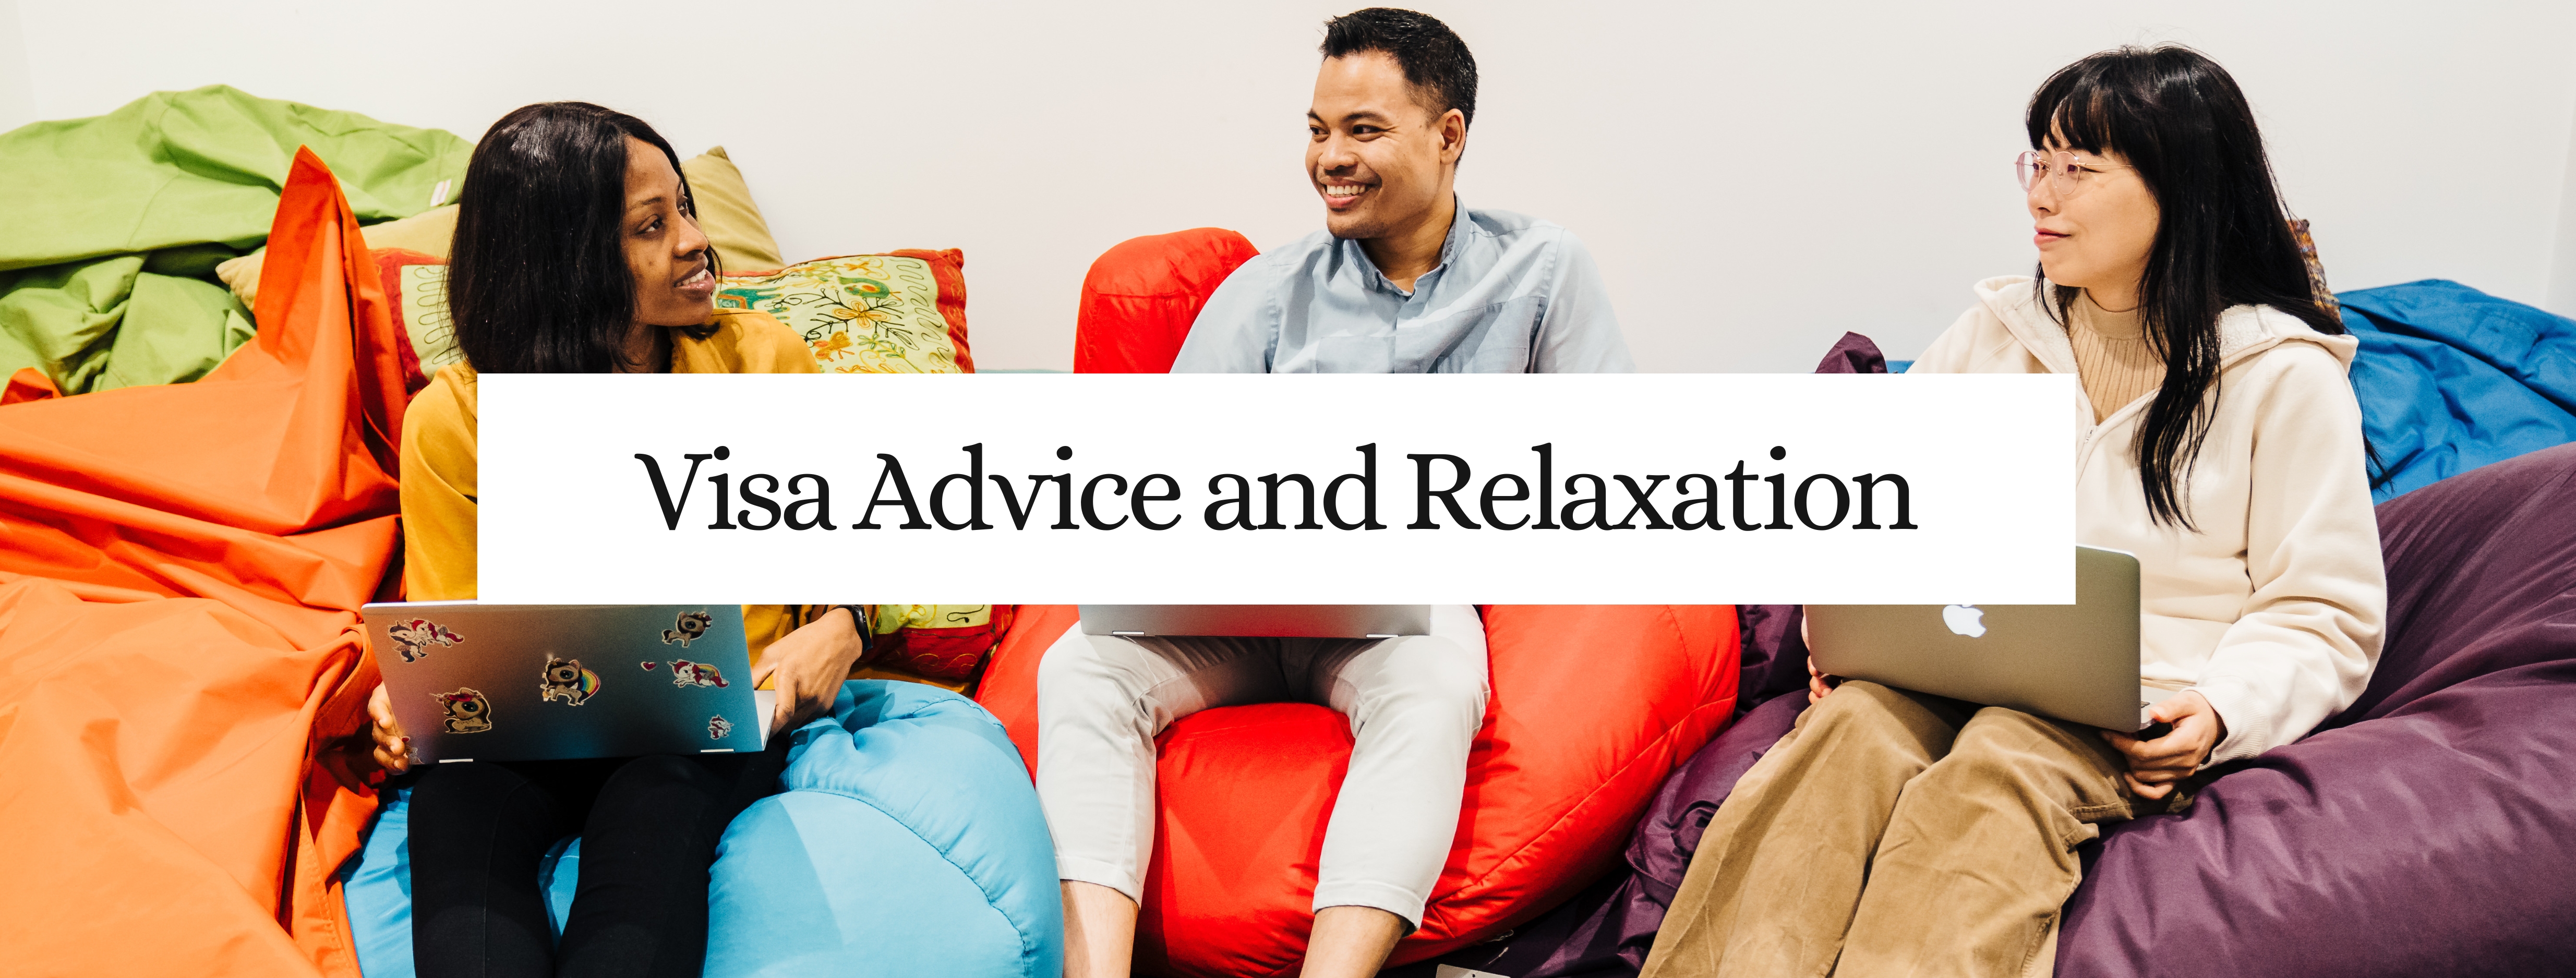 Visa Advice and Relaxation